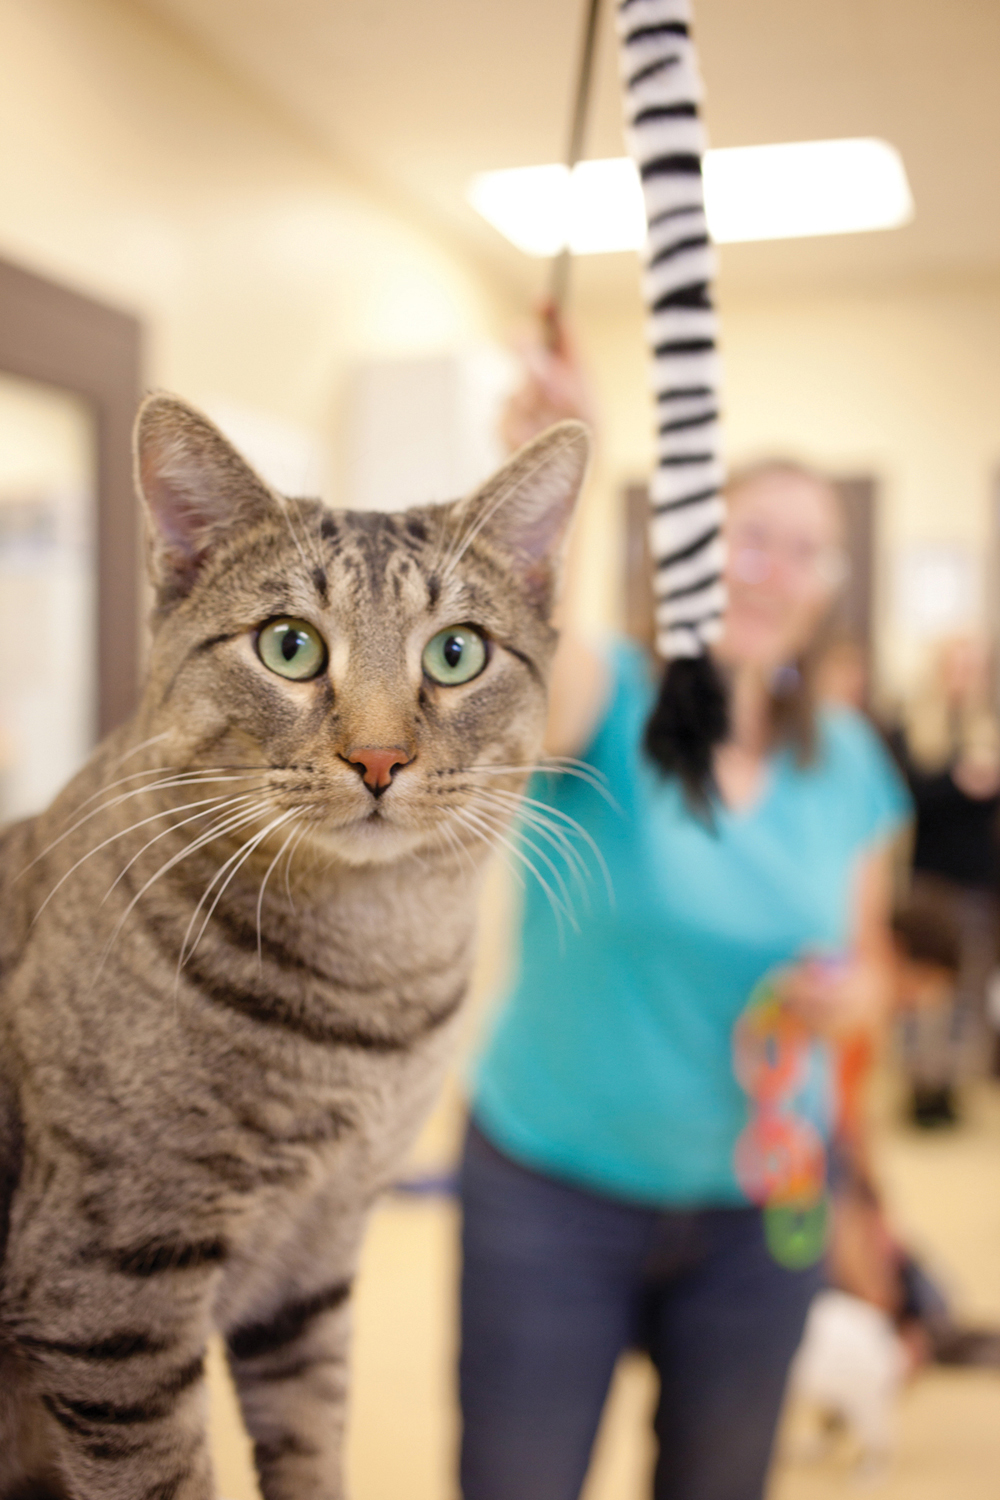 Volunteers care for the cats in the animal shelter’s communal ‘cat room,’ providing food, water, medicine and entertainment.